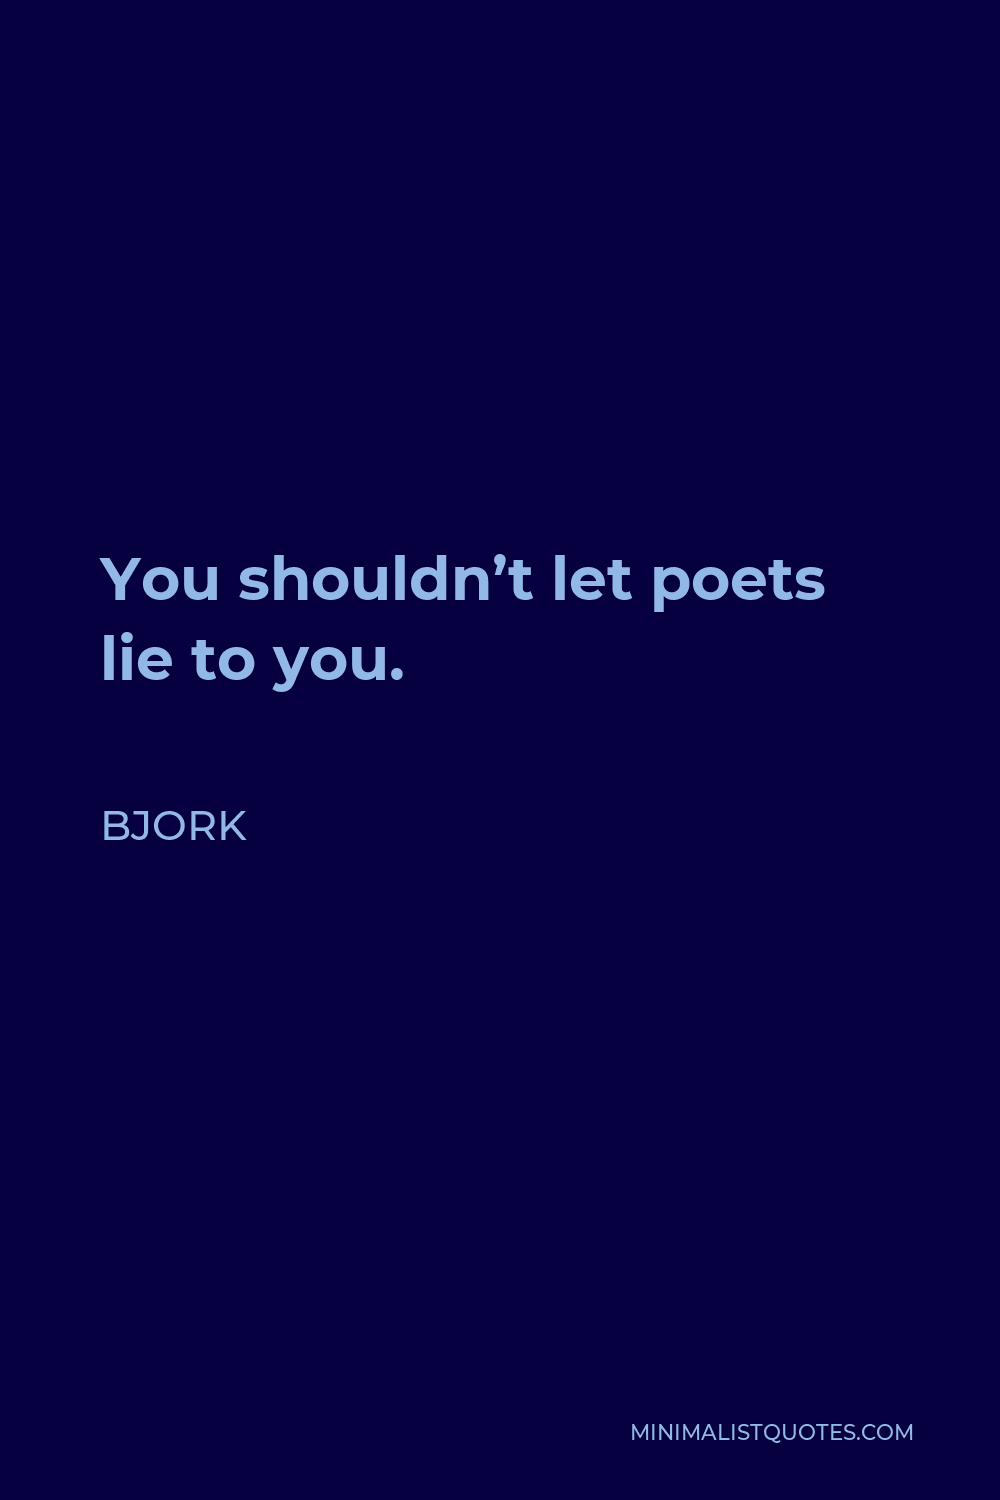 Bjork Quote - You shouldn’t let poets lie to you.